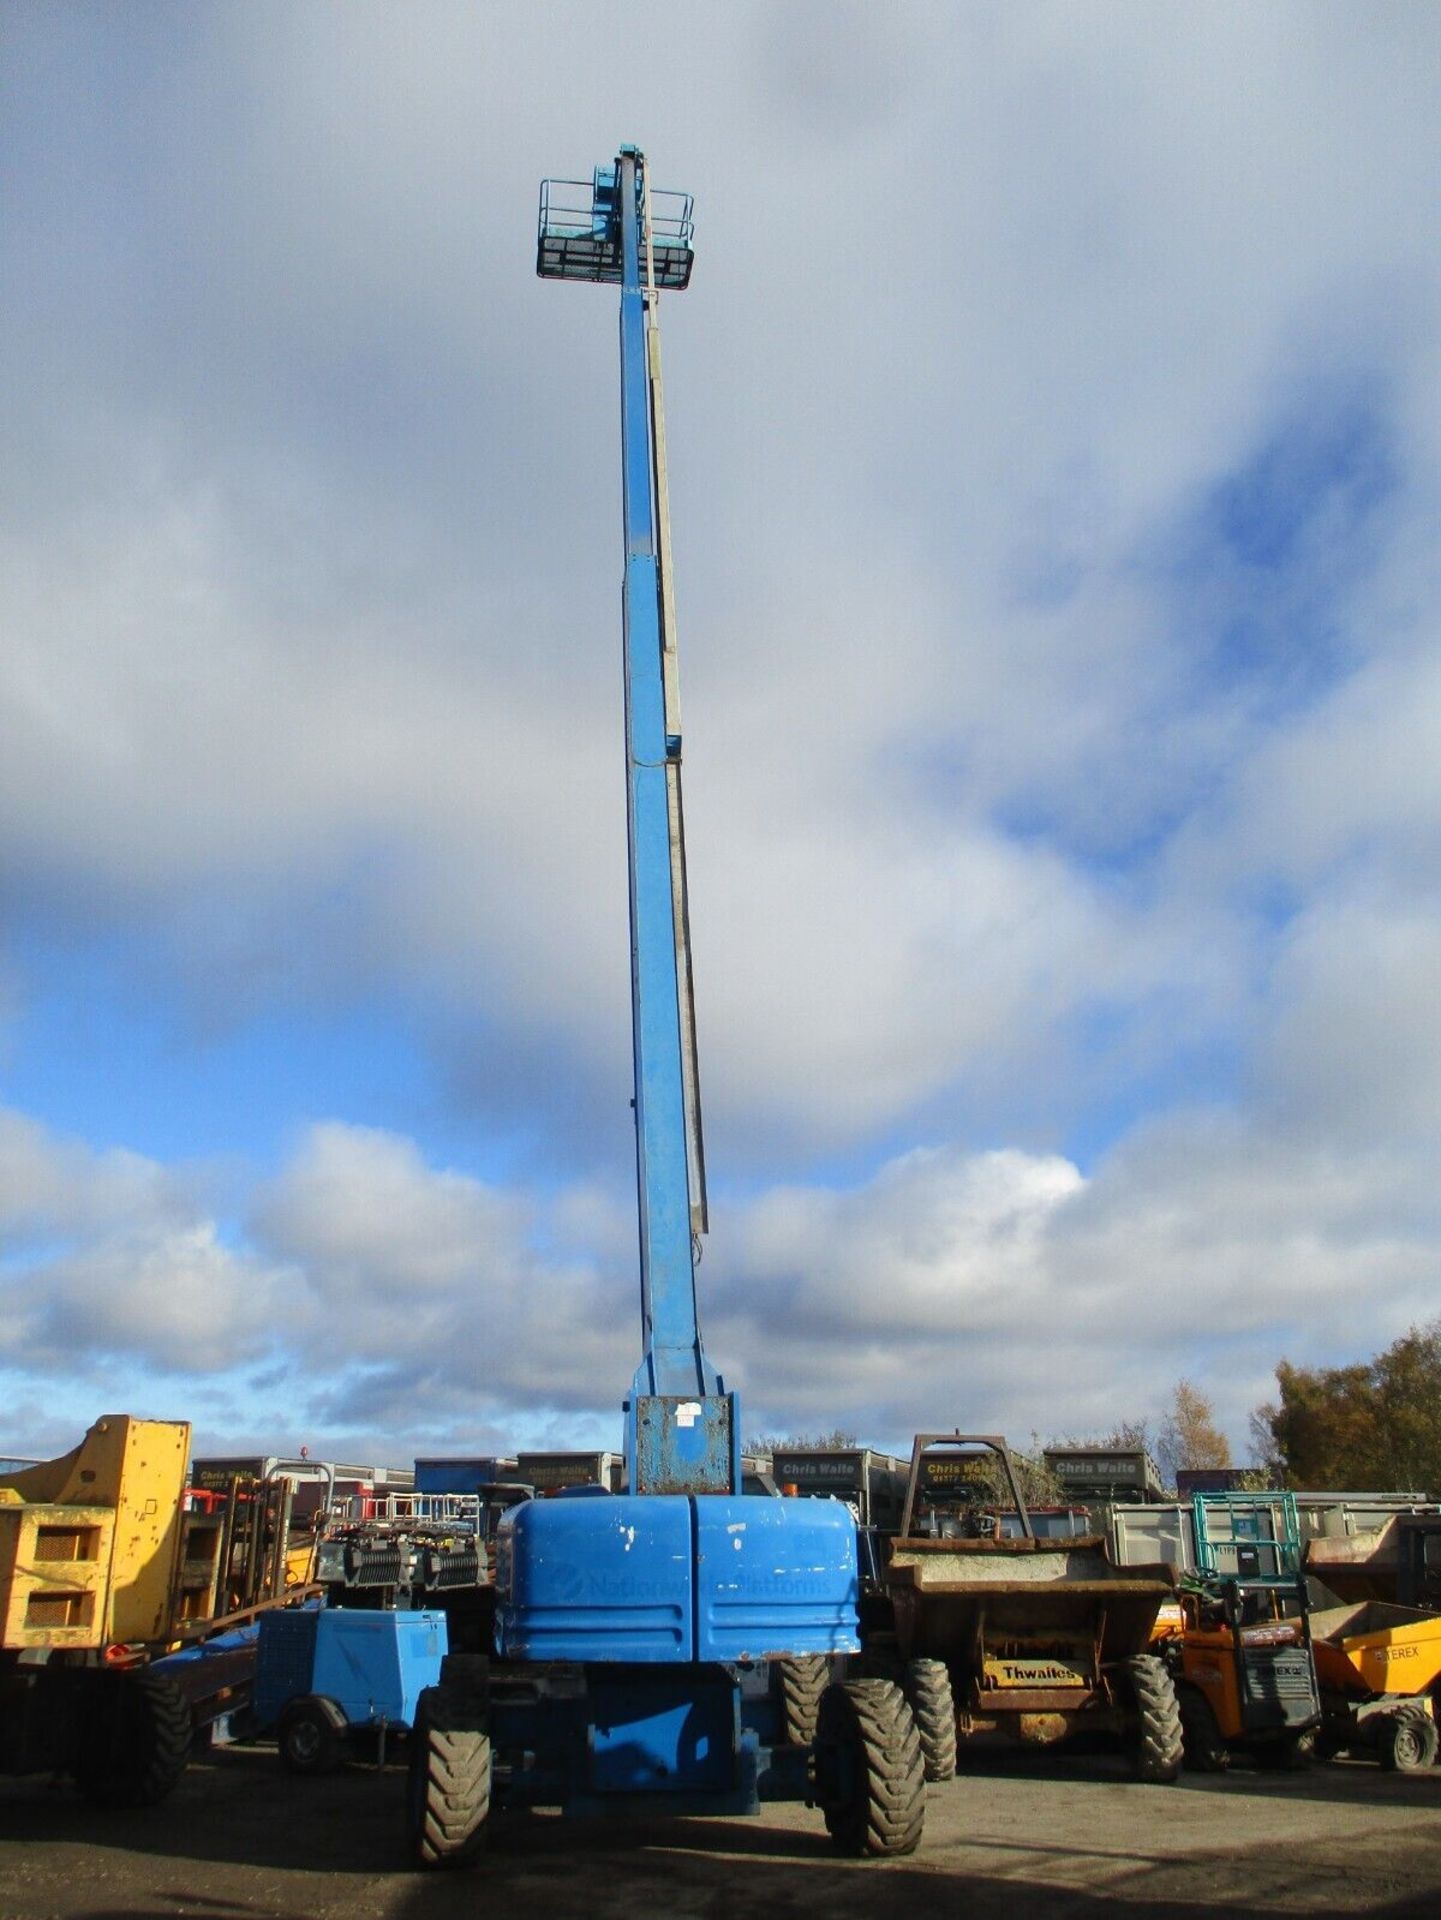 GENIE S85: SOARING HEIGHTS WITH 27.9M CHERRY PICKER - Image 13 of 13